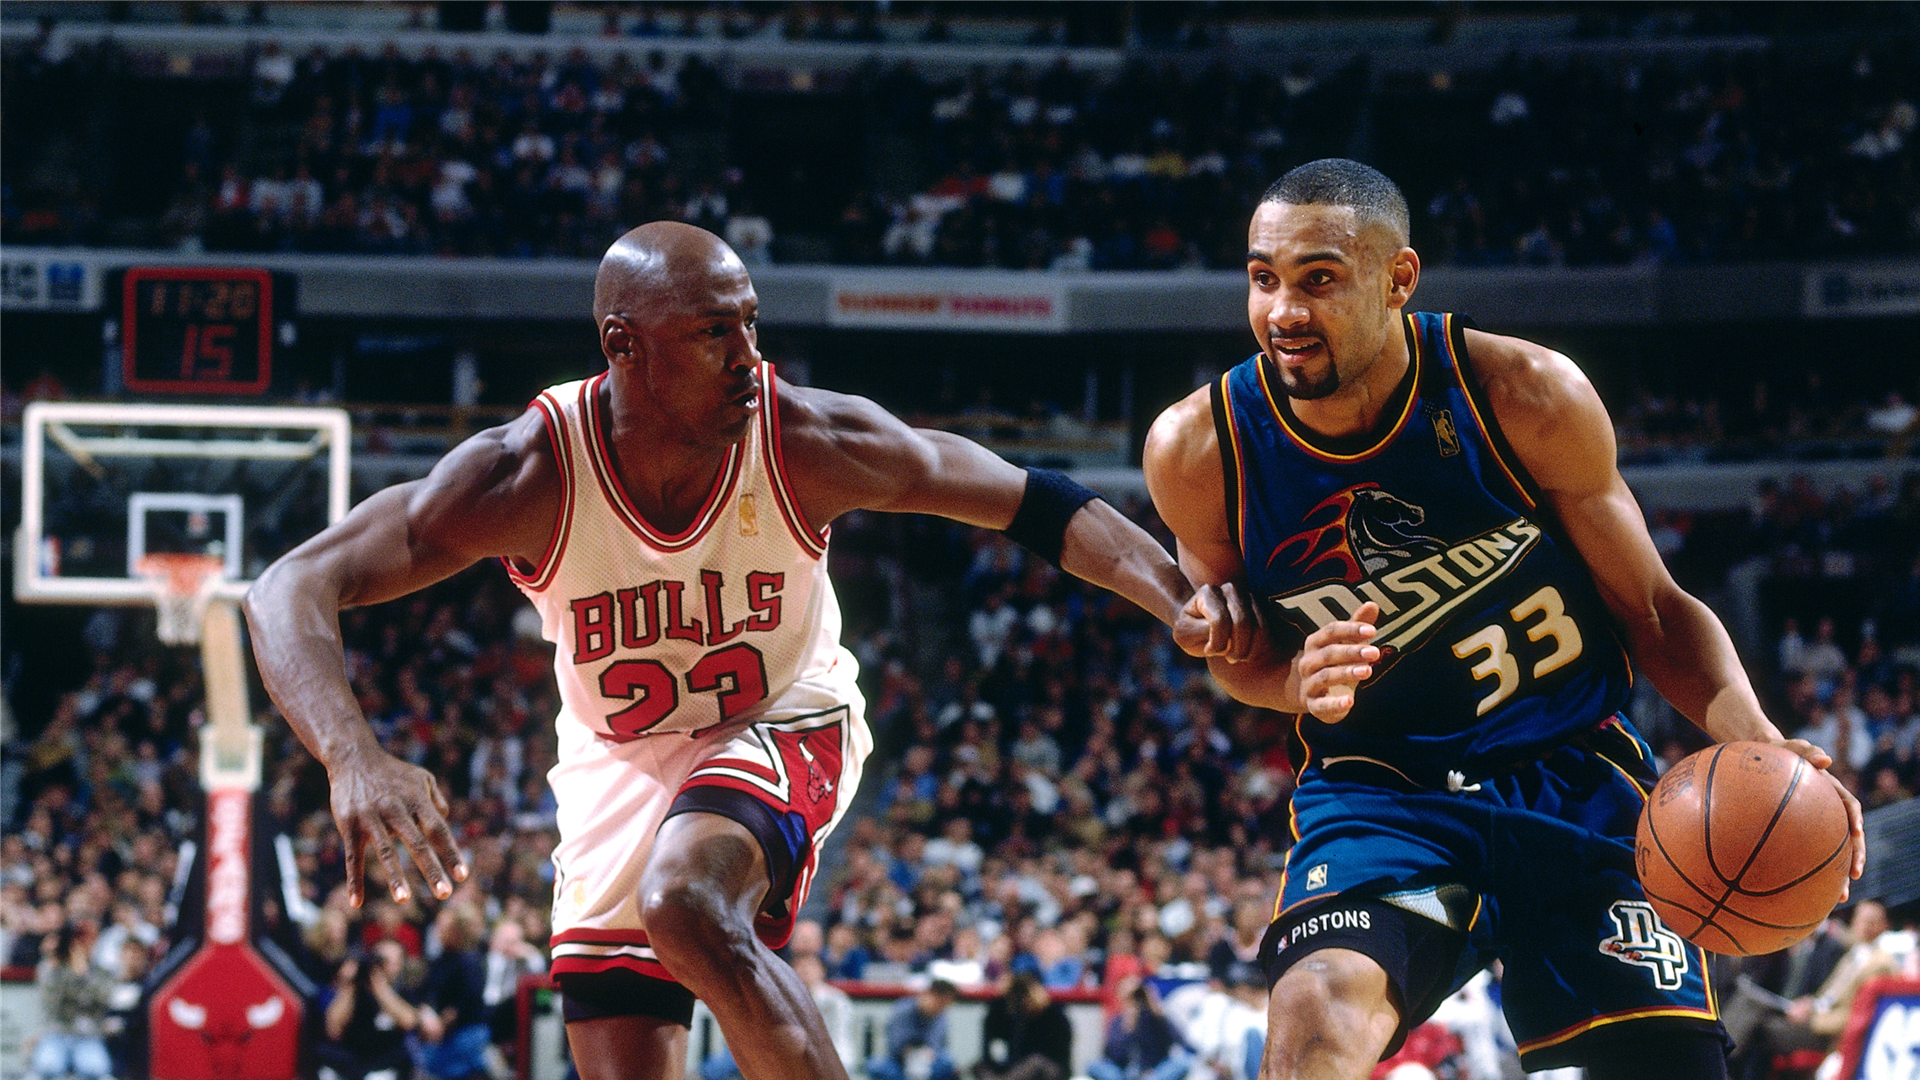 Ex-Piston Grant Hill in 13-member Basketball Hall of Fame class